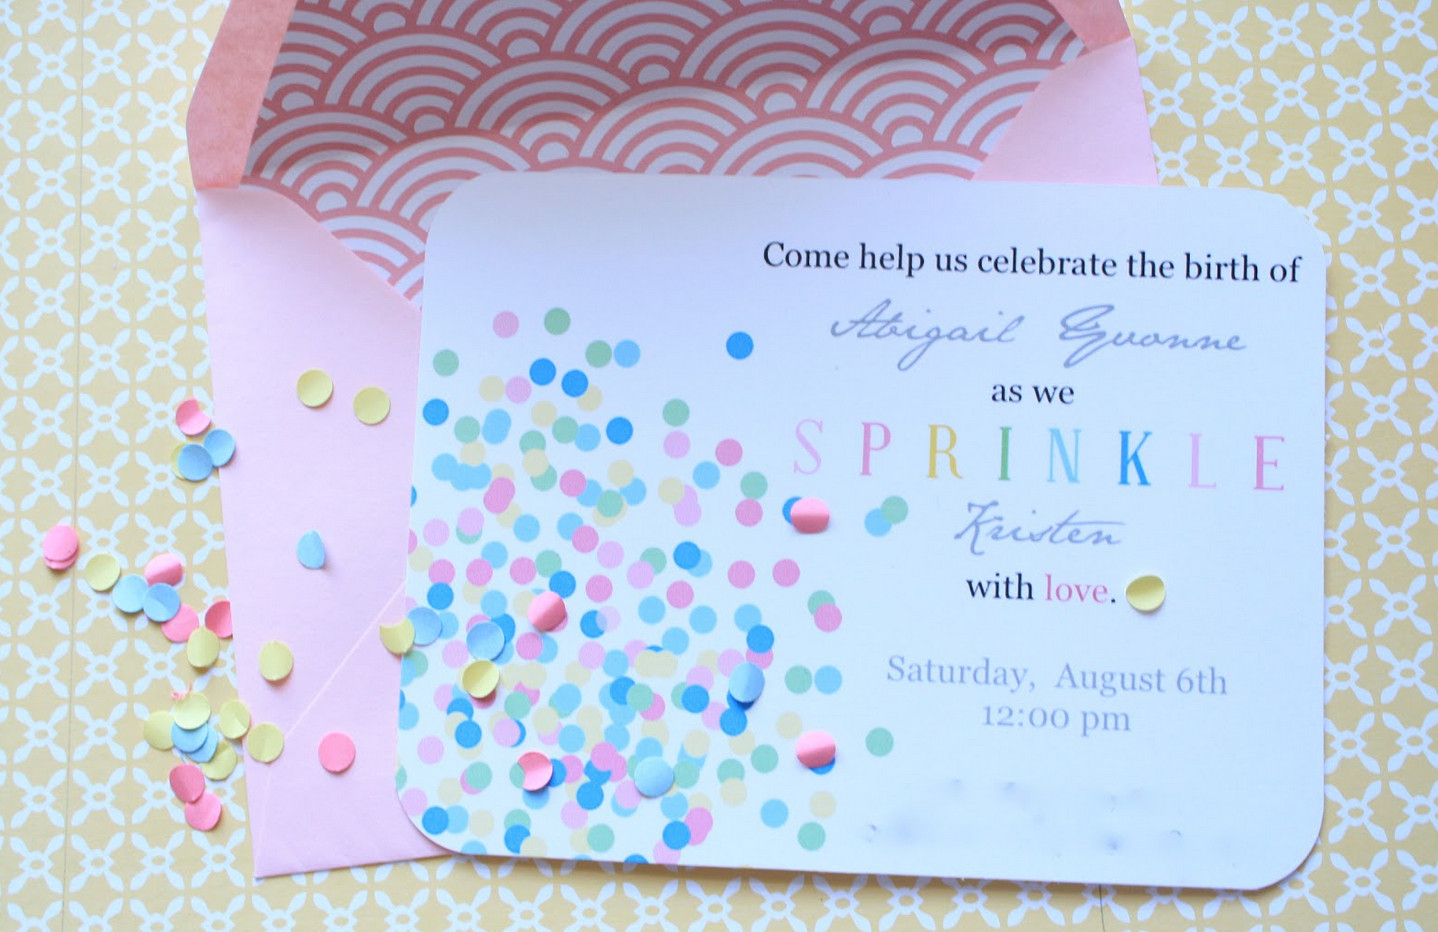 10 Pretty Baby Shower Ideas For Second Baby sprinkle baby shower and its benefits home party theme ideas 74 1 2024